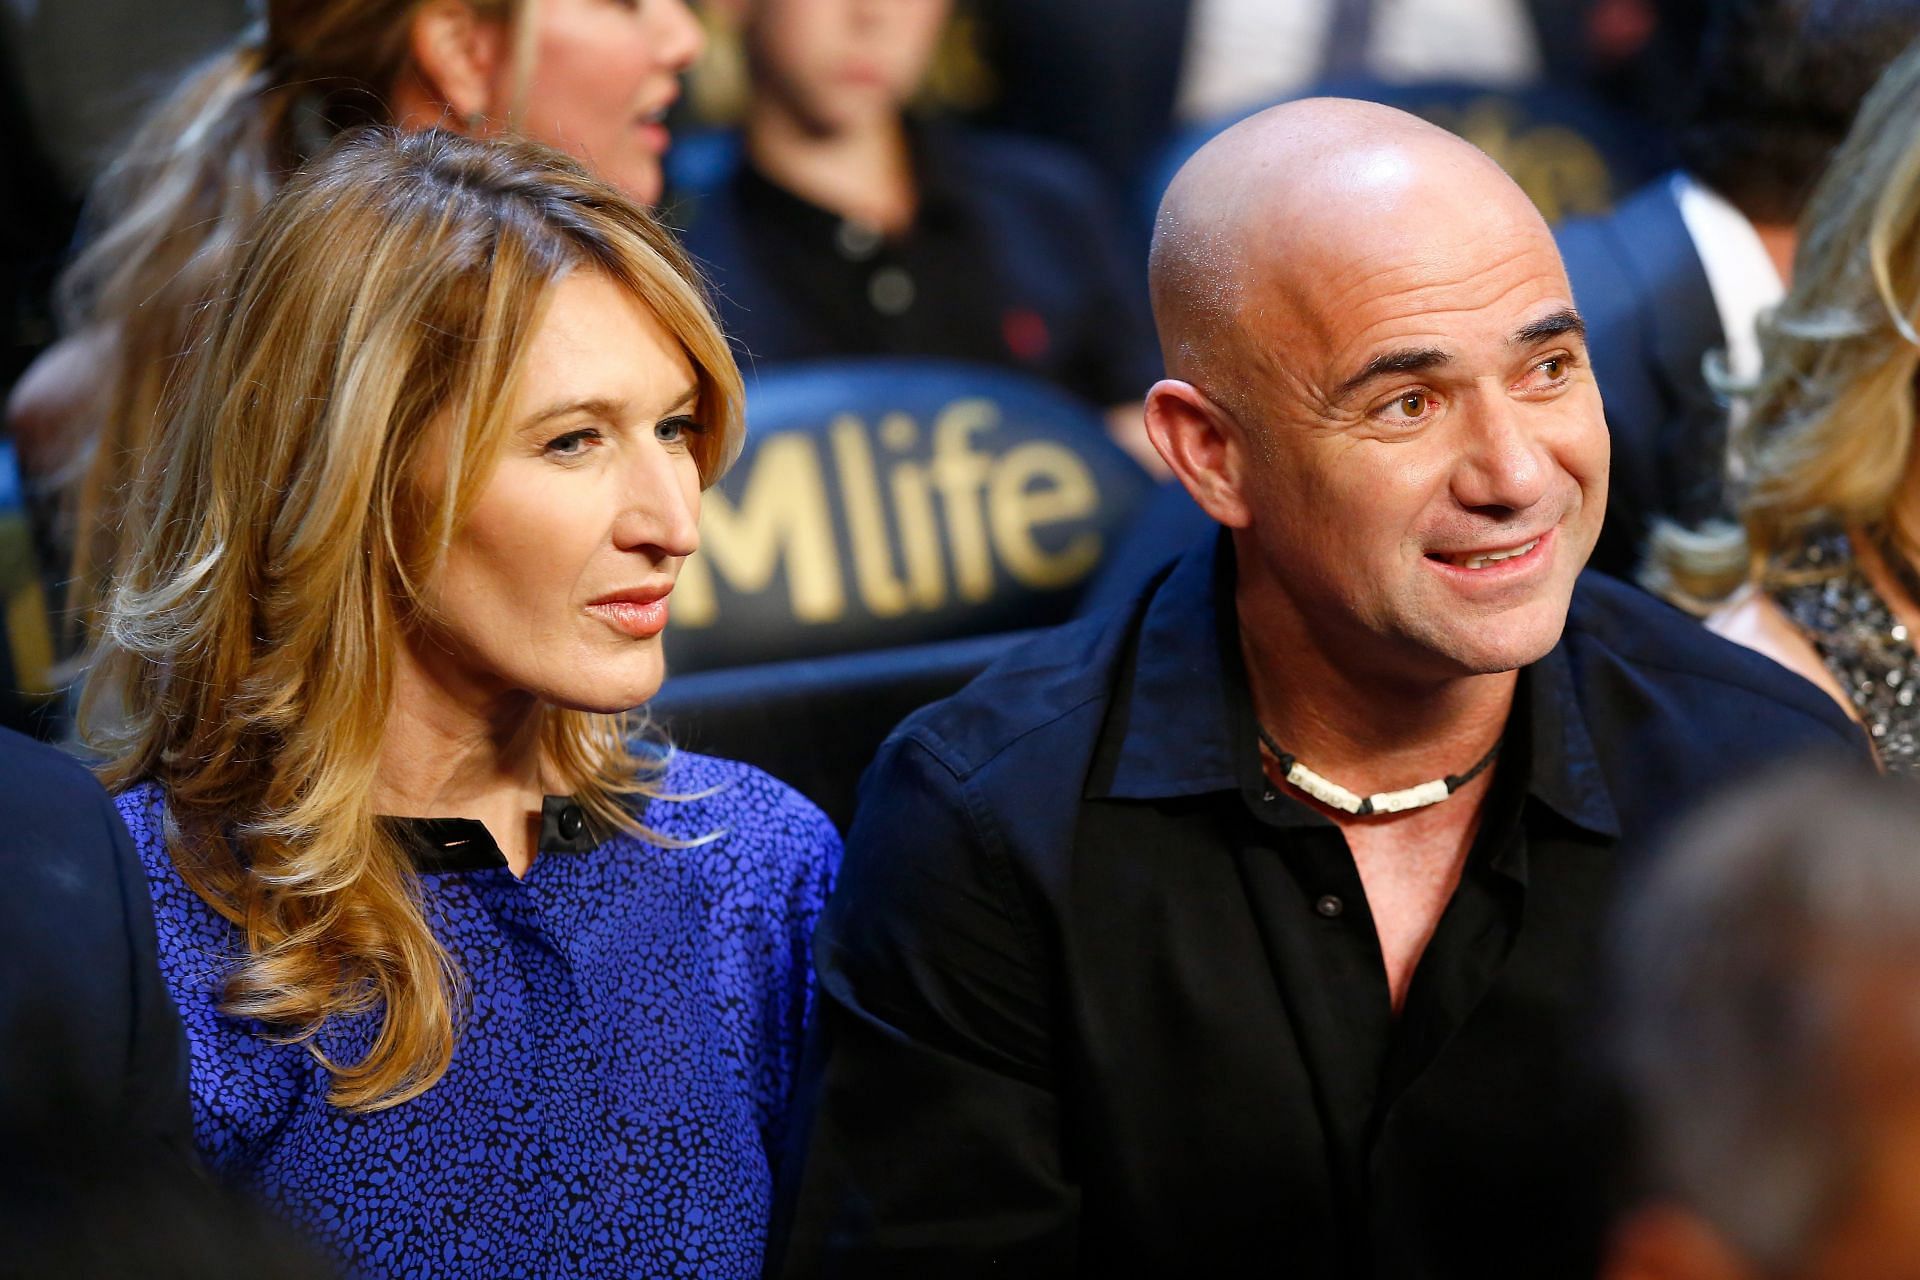 Andre Agassi and Steffi Graf pictured together in 2015